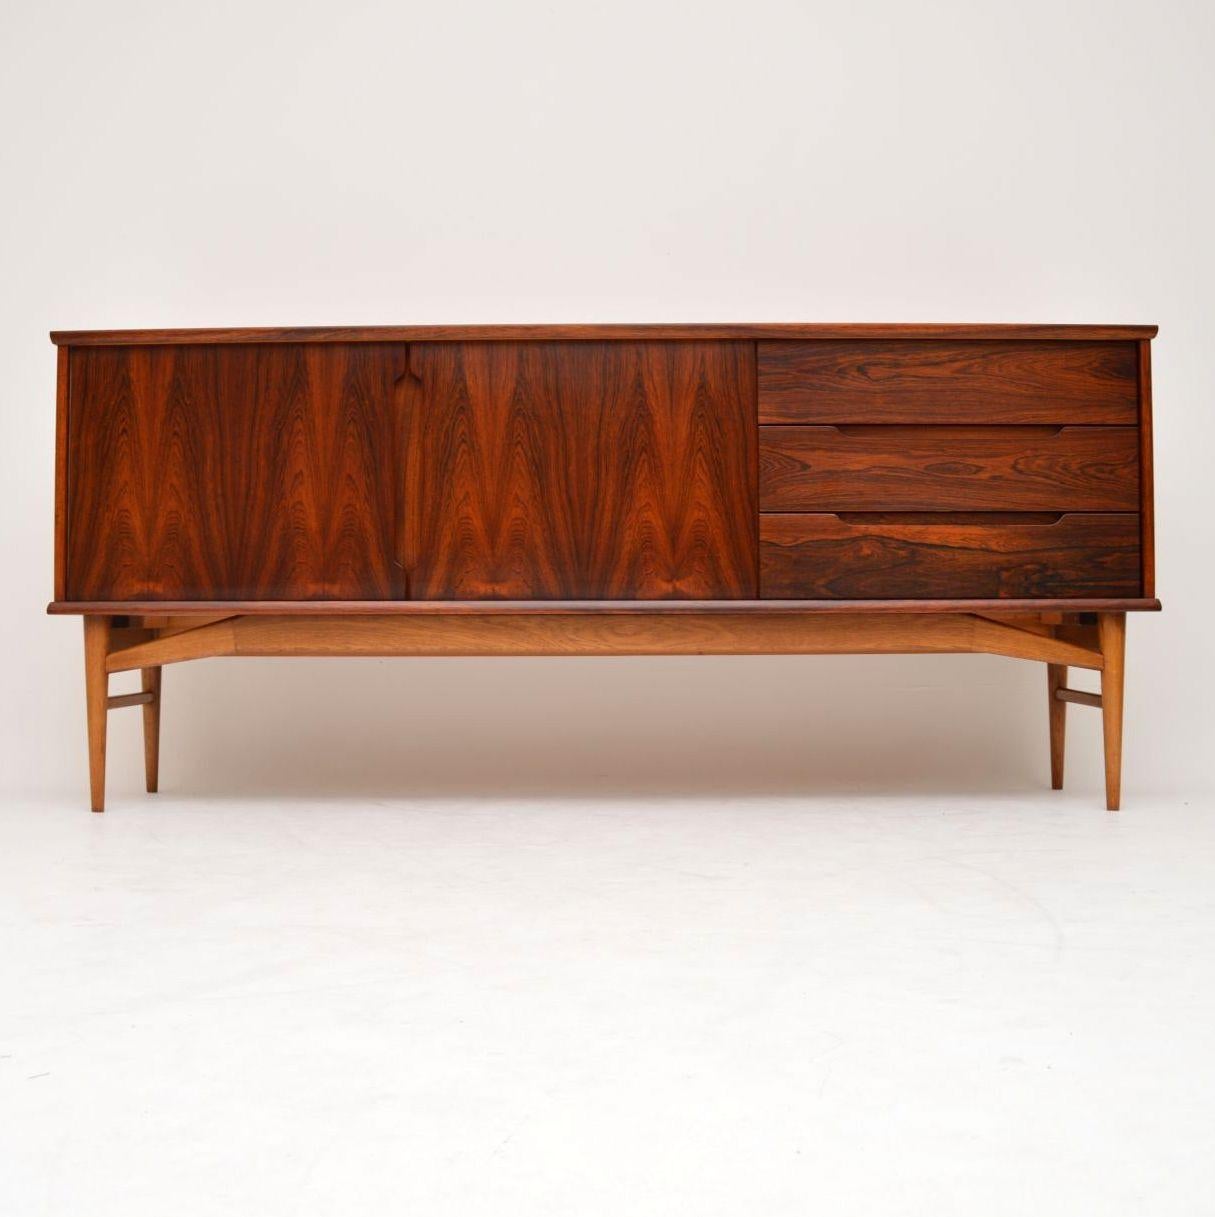 A stunning and extremely well made vintage Danish sideboard, this was made in the 1960s by Fredericia. It has a gorgeous colour and striking grain patterns throughout, this sits on solid oak legs. We have had this stripped and re-polished to a very